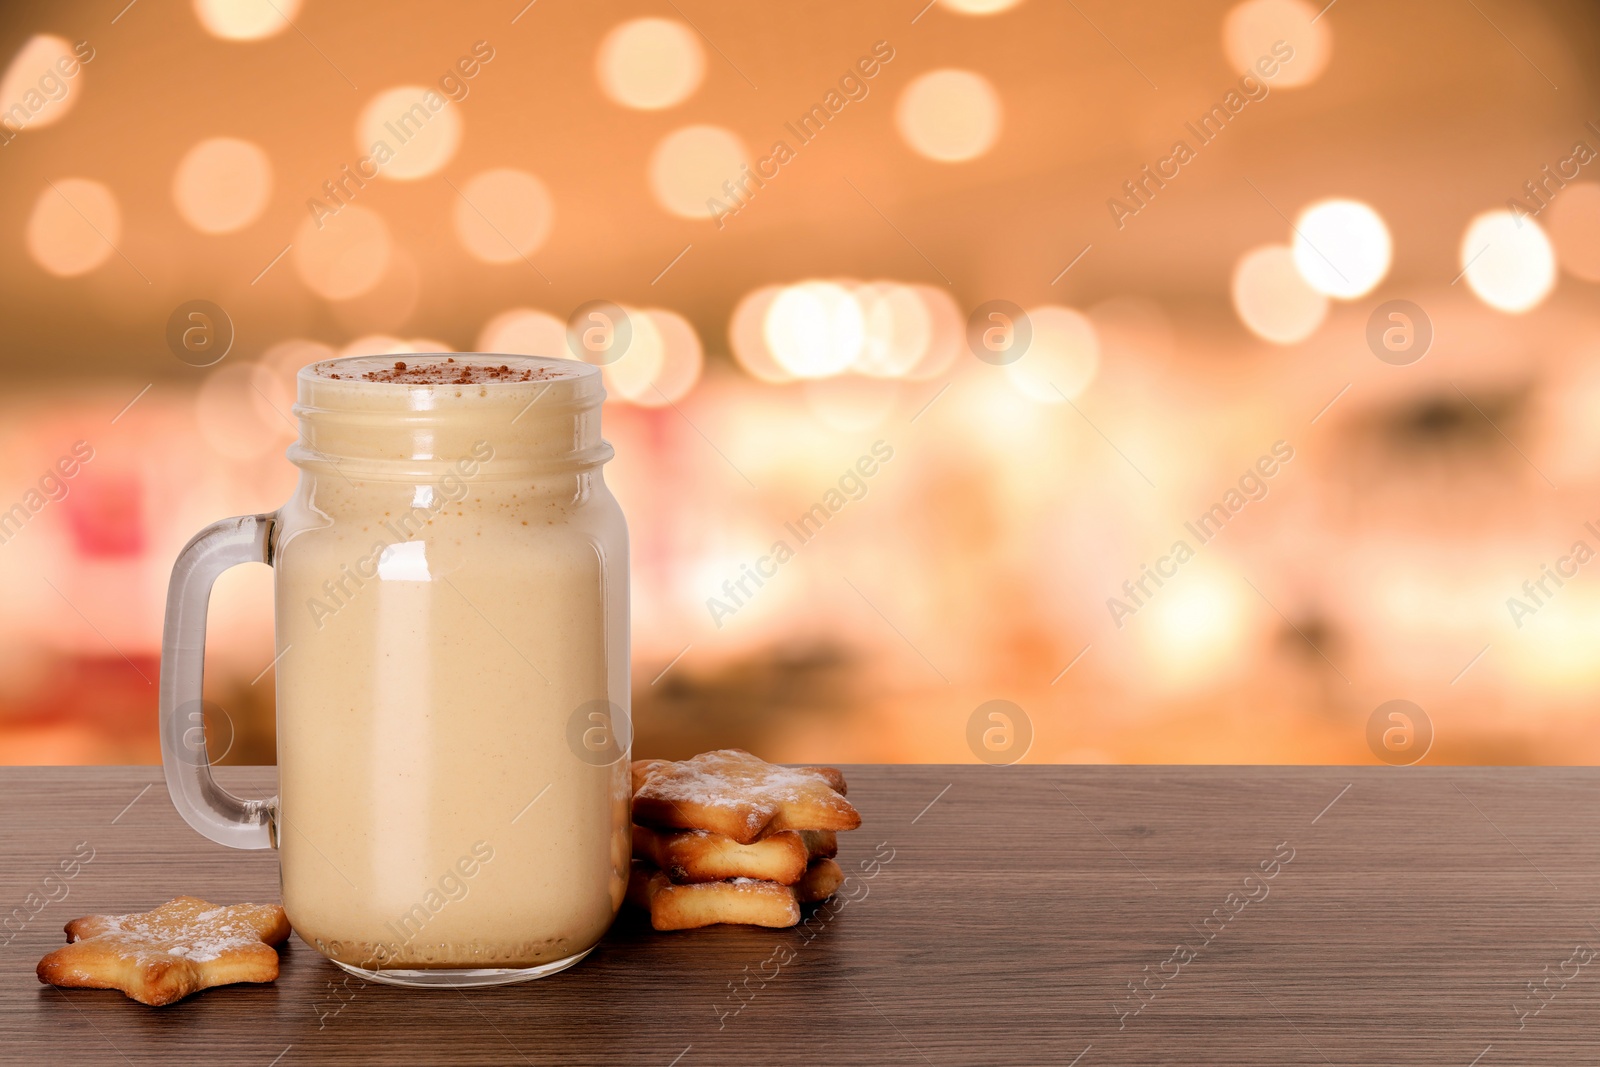 Image of Mason jar with delicious eggnog and cookies on wooden table in bar, space for text